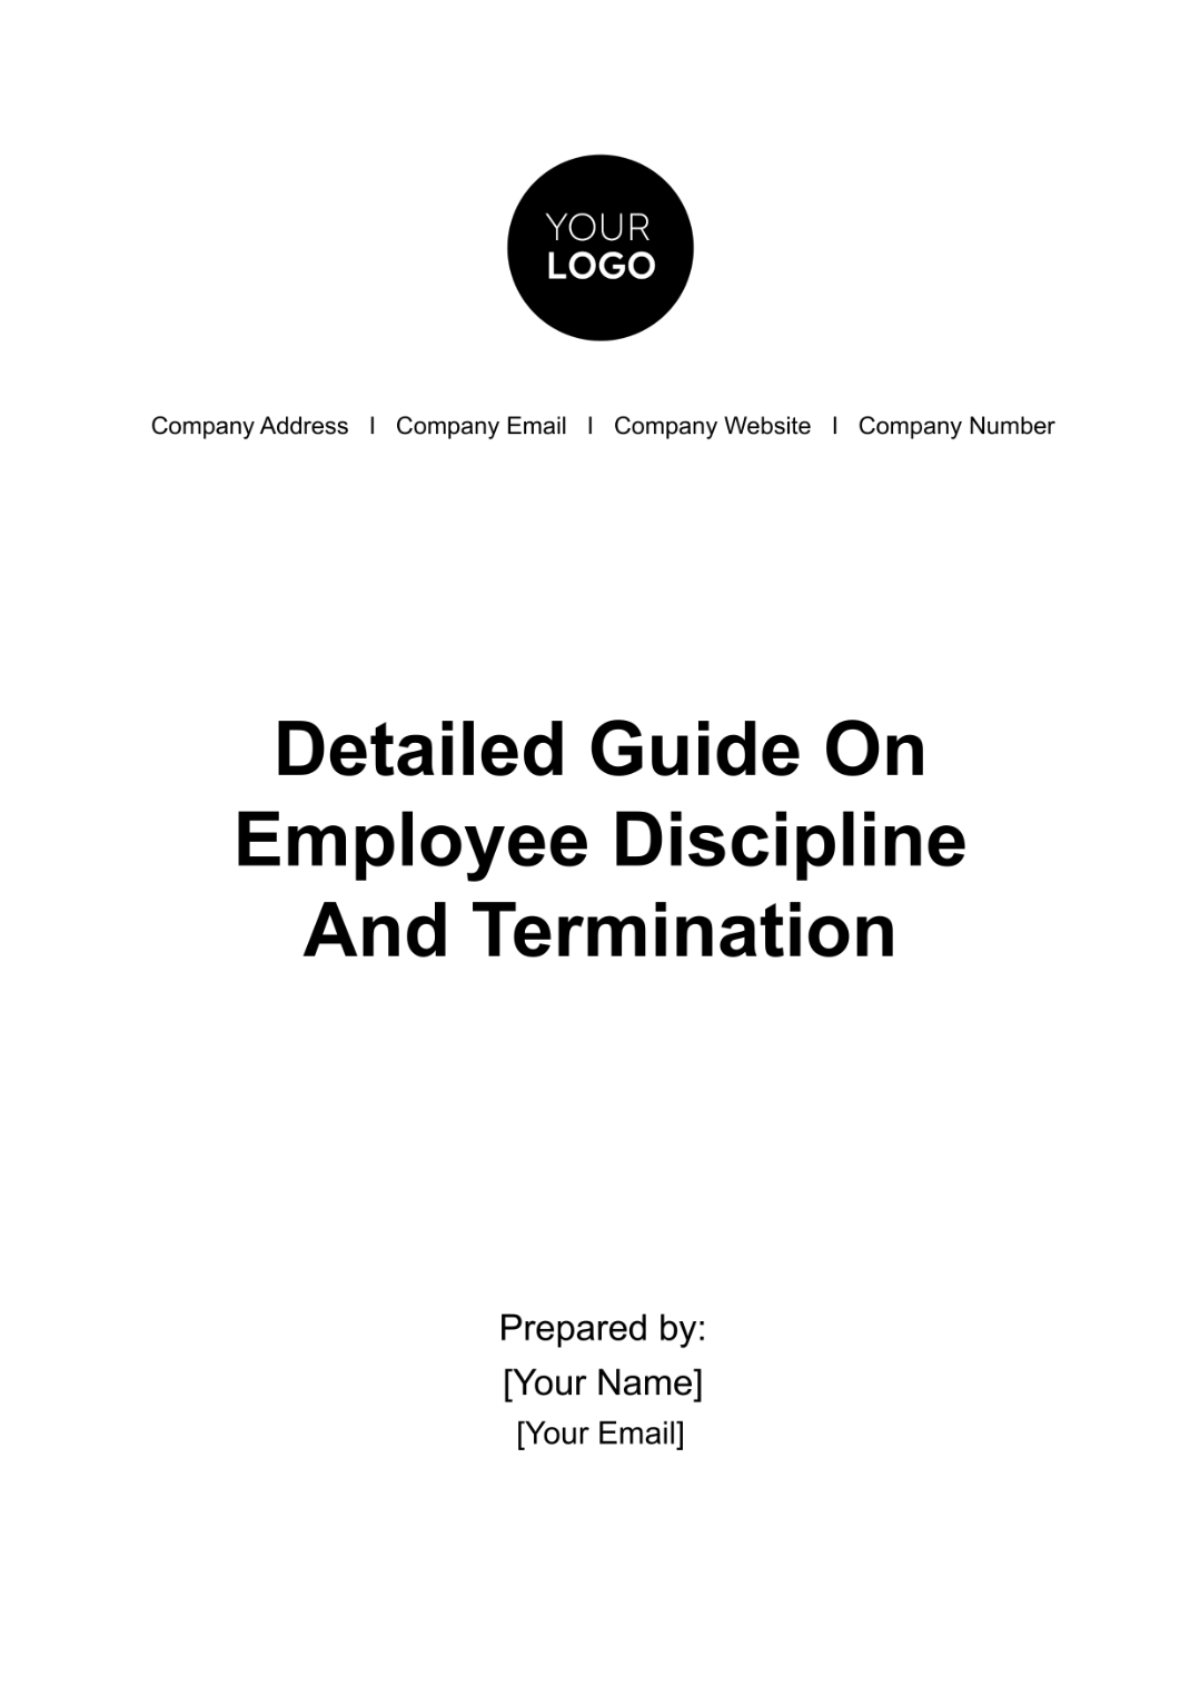 Detailed Guide on Employee Discipline and Termination HR Template